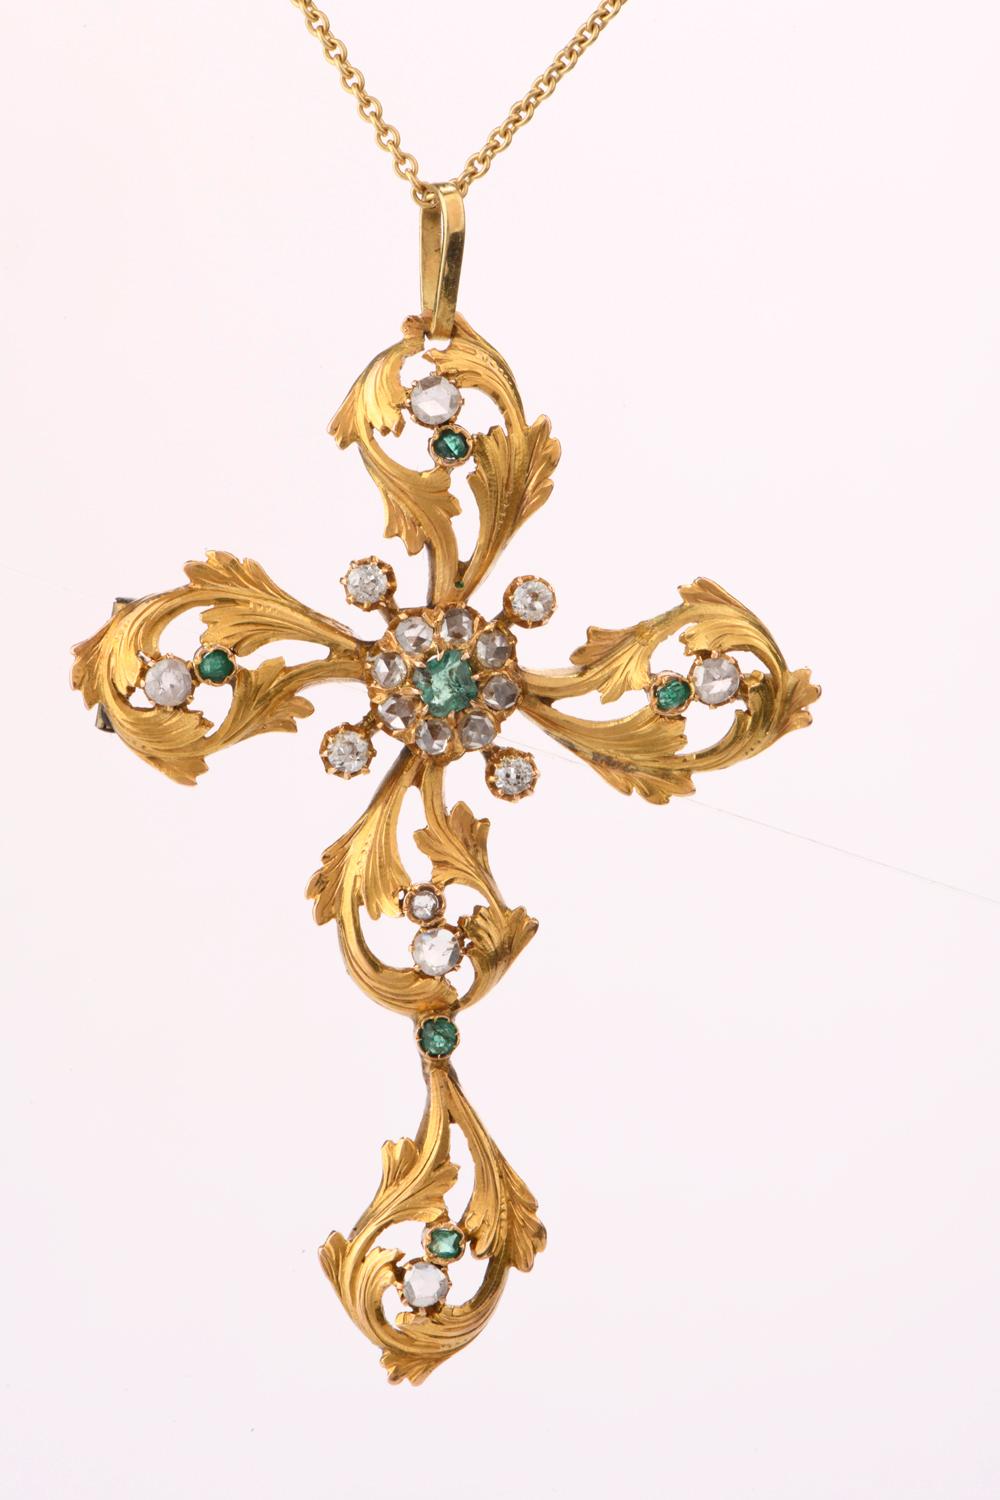 This large vintage Pendant Brooch was inspired in a leaf patterned cross and crafted in 18K yellow gold.

A continuous pattern of leaves run throughout and are embellished with rose cut and European cut Dimaonds and Emeralds.

Diamonds weigh appx.